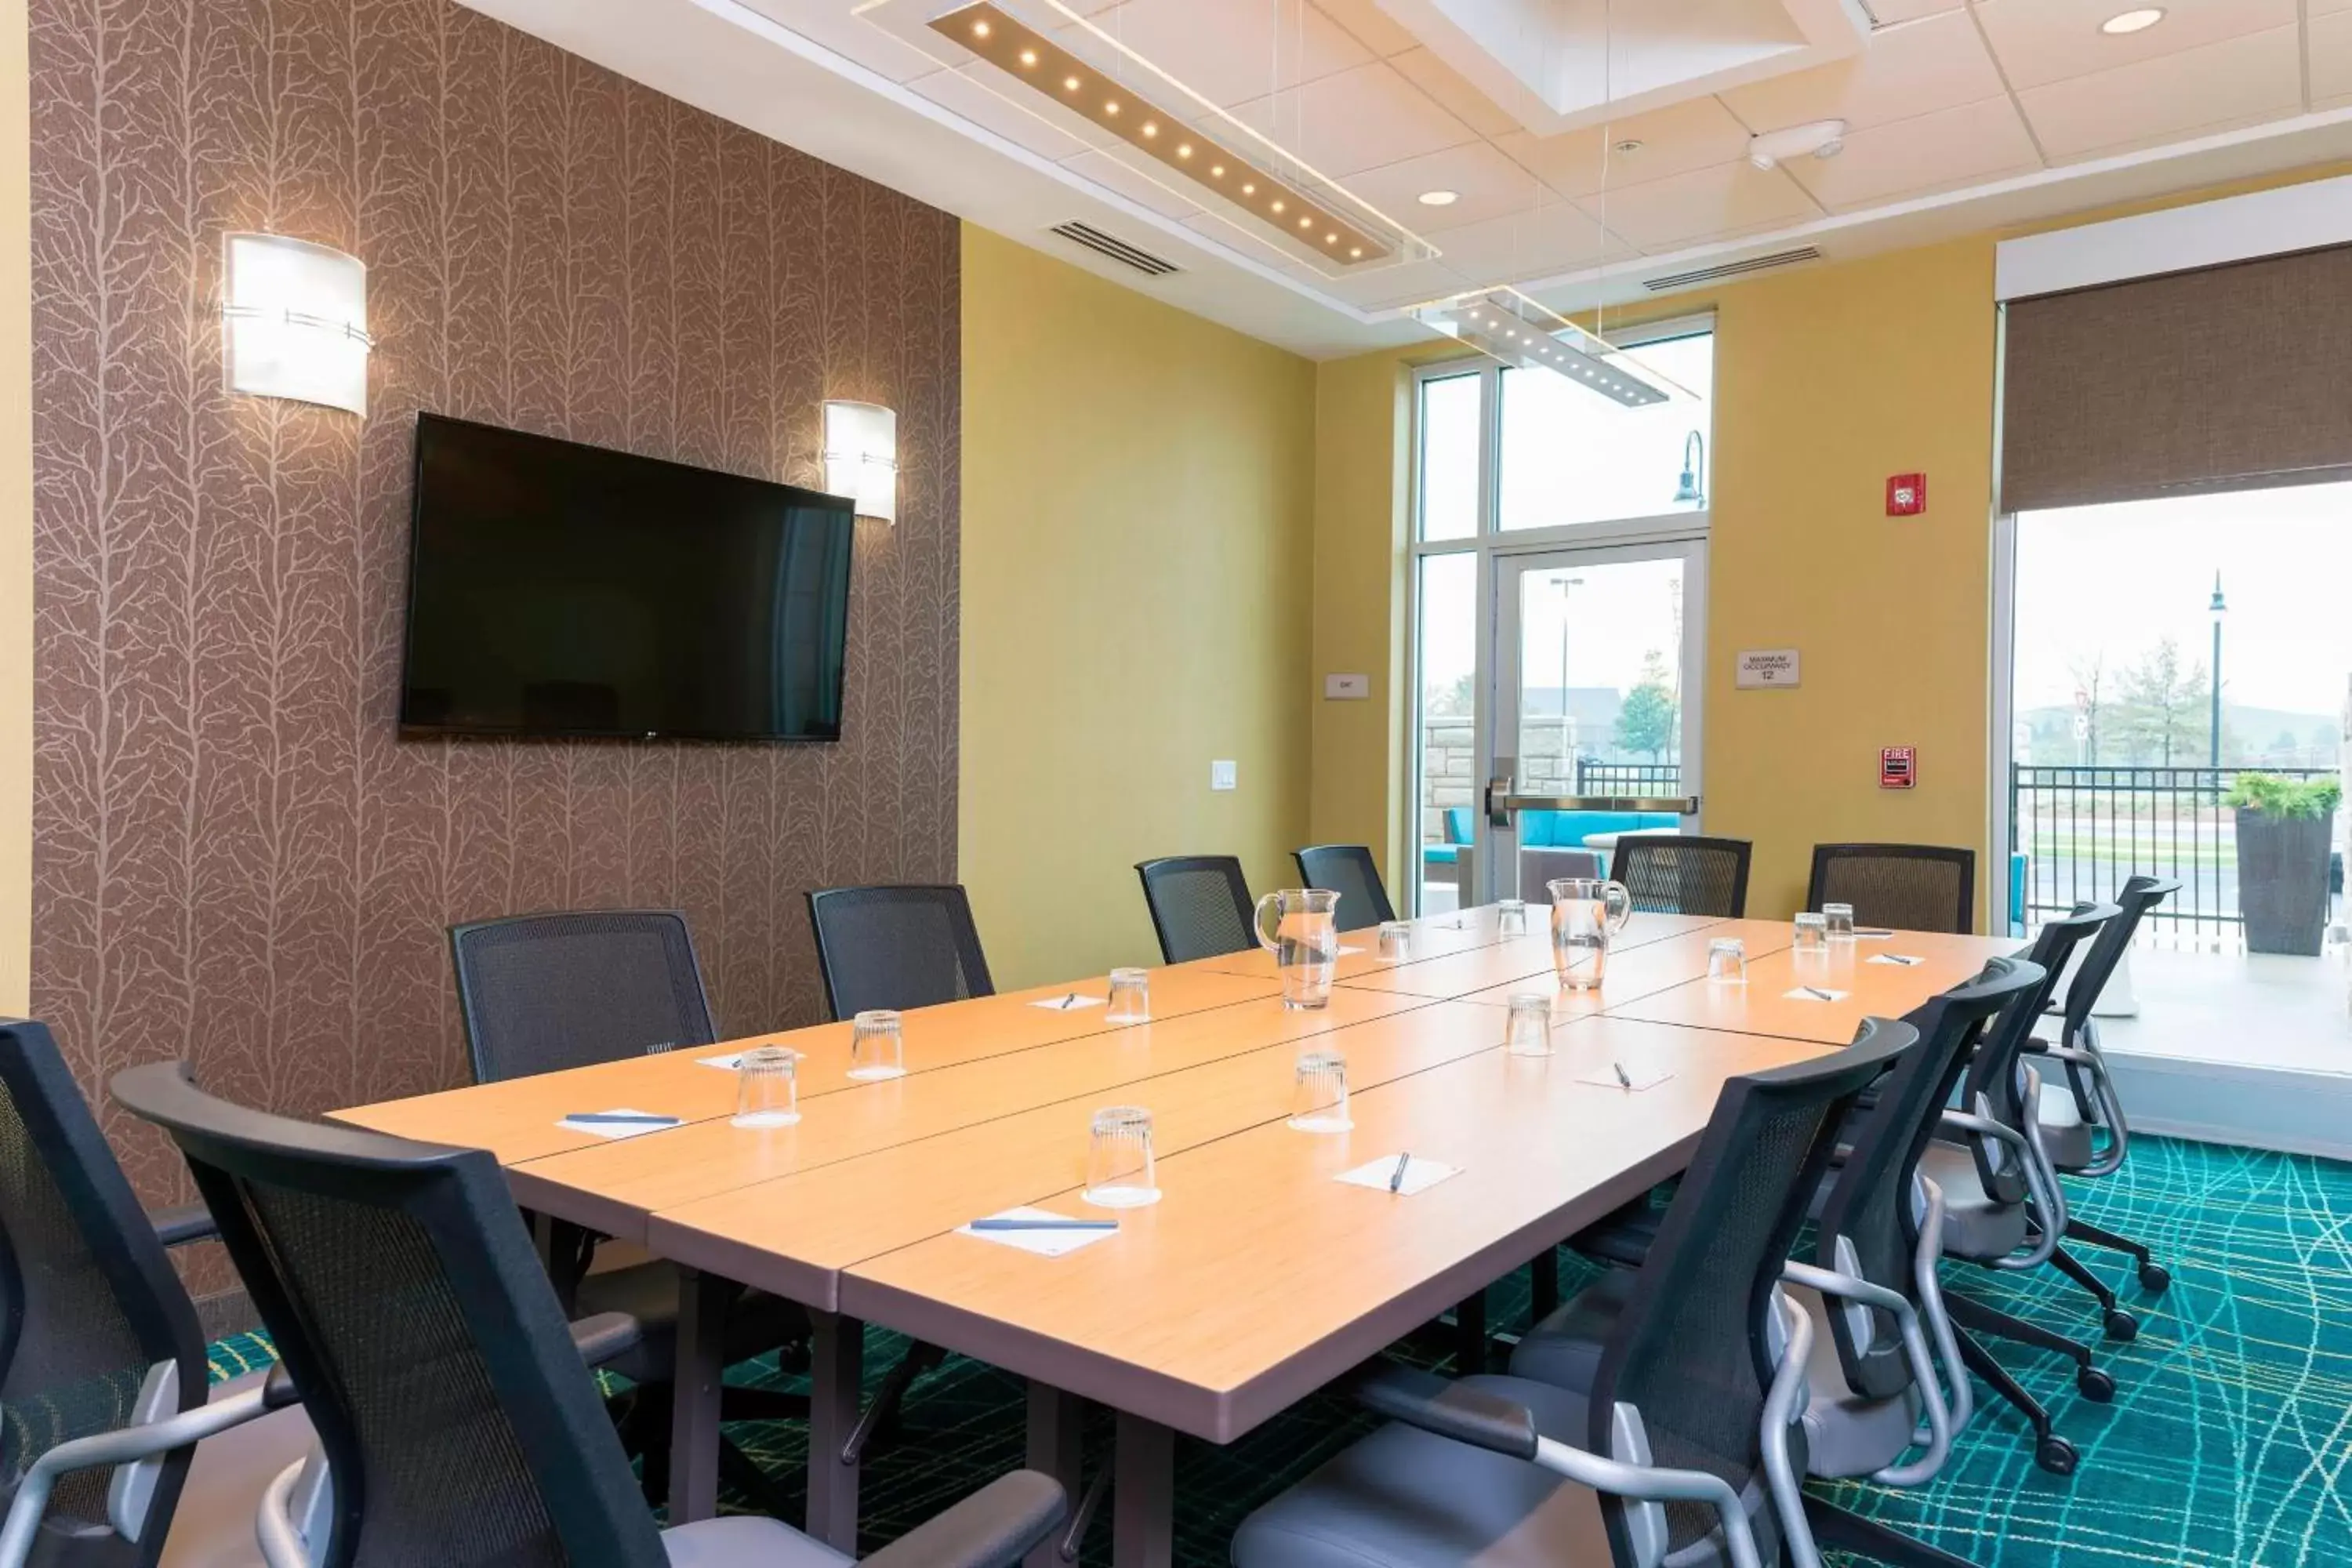 Meeting/conference room in SpringHill Suites by Marriott Chicago Southeast/Munster, IN